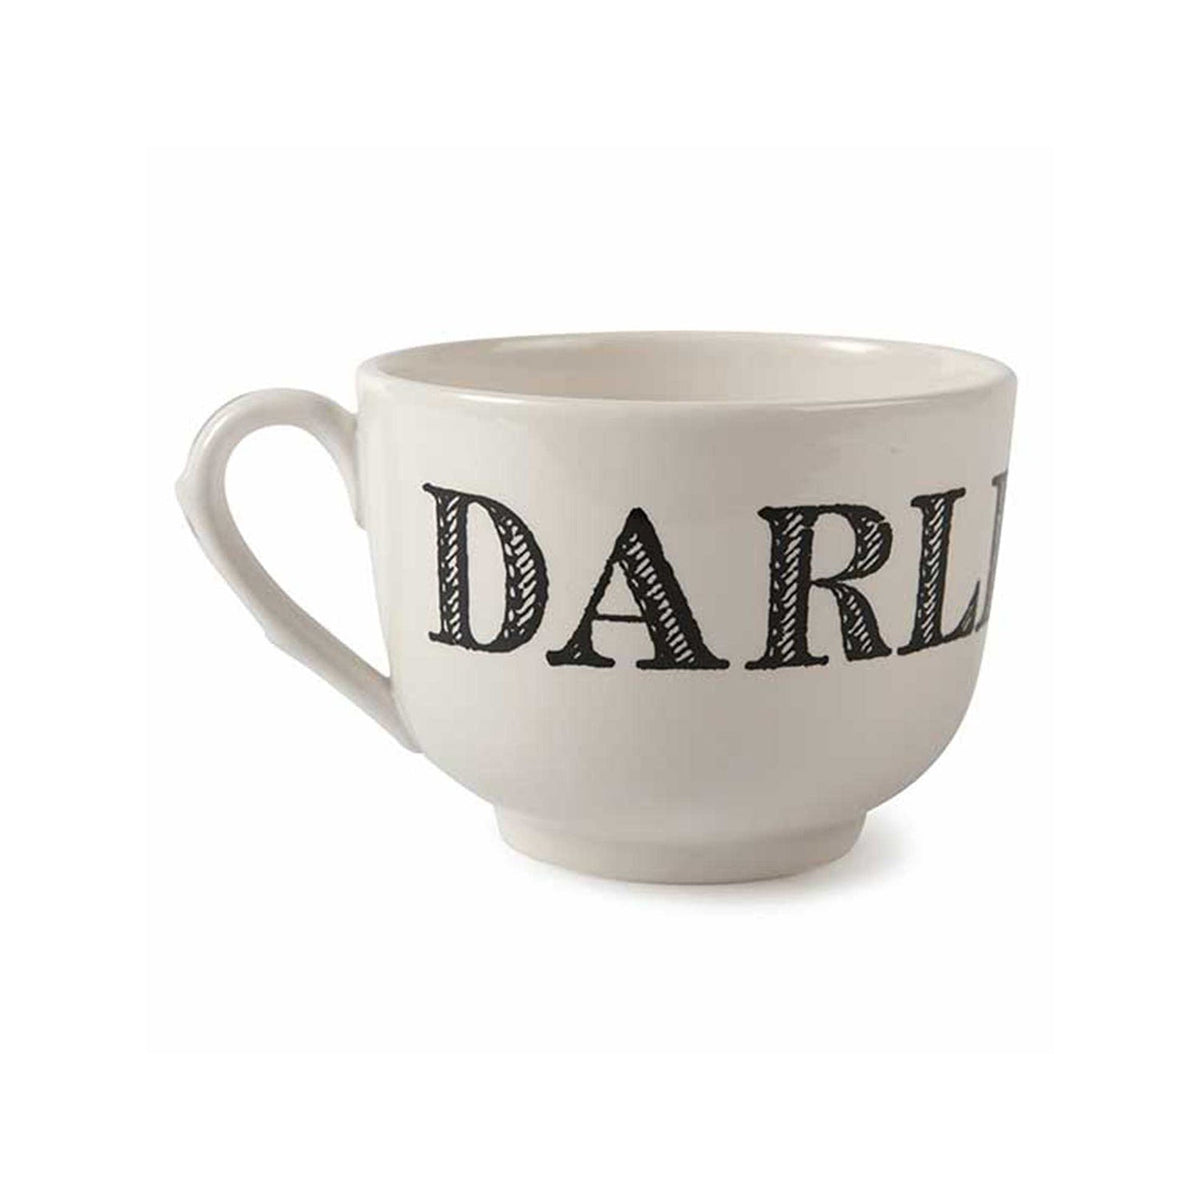 Darling Endearment Stoneware Grand Cafe Cup, Single